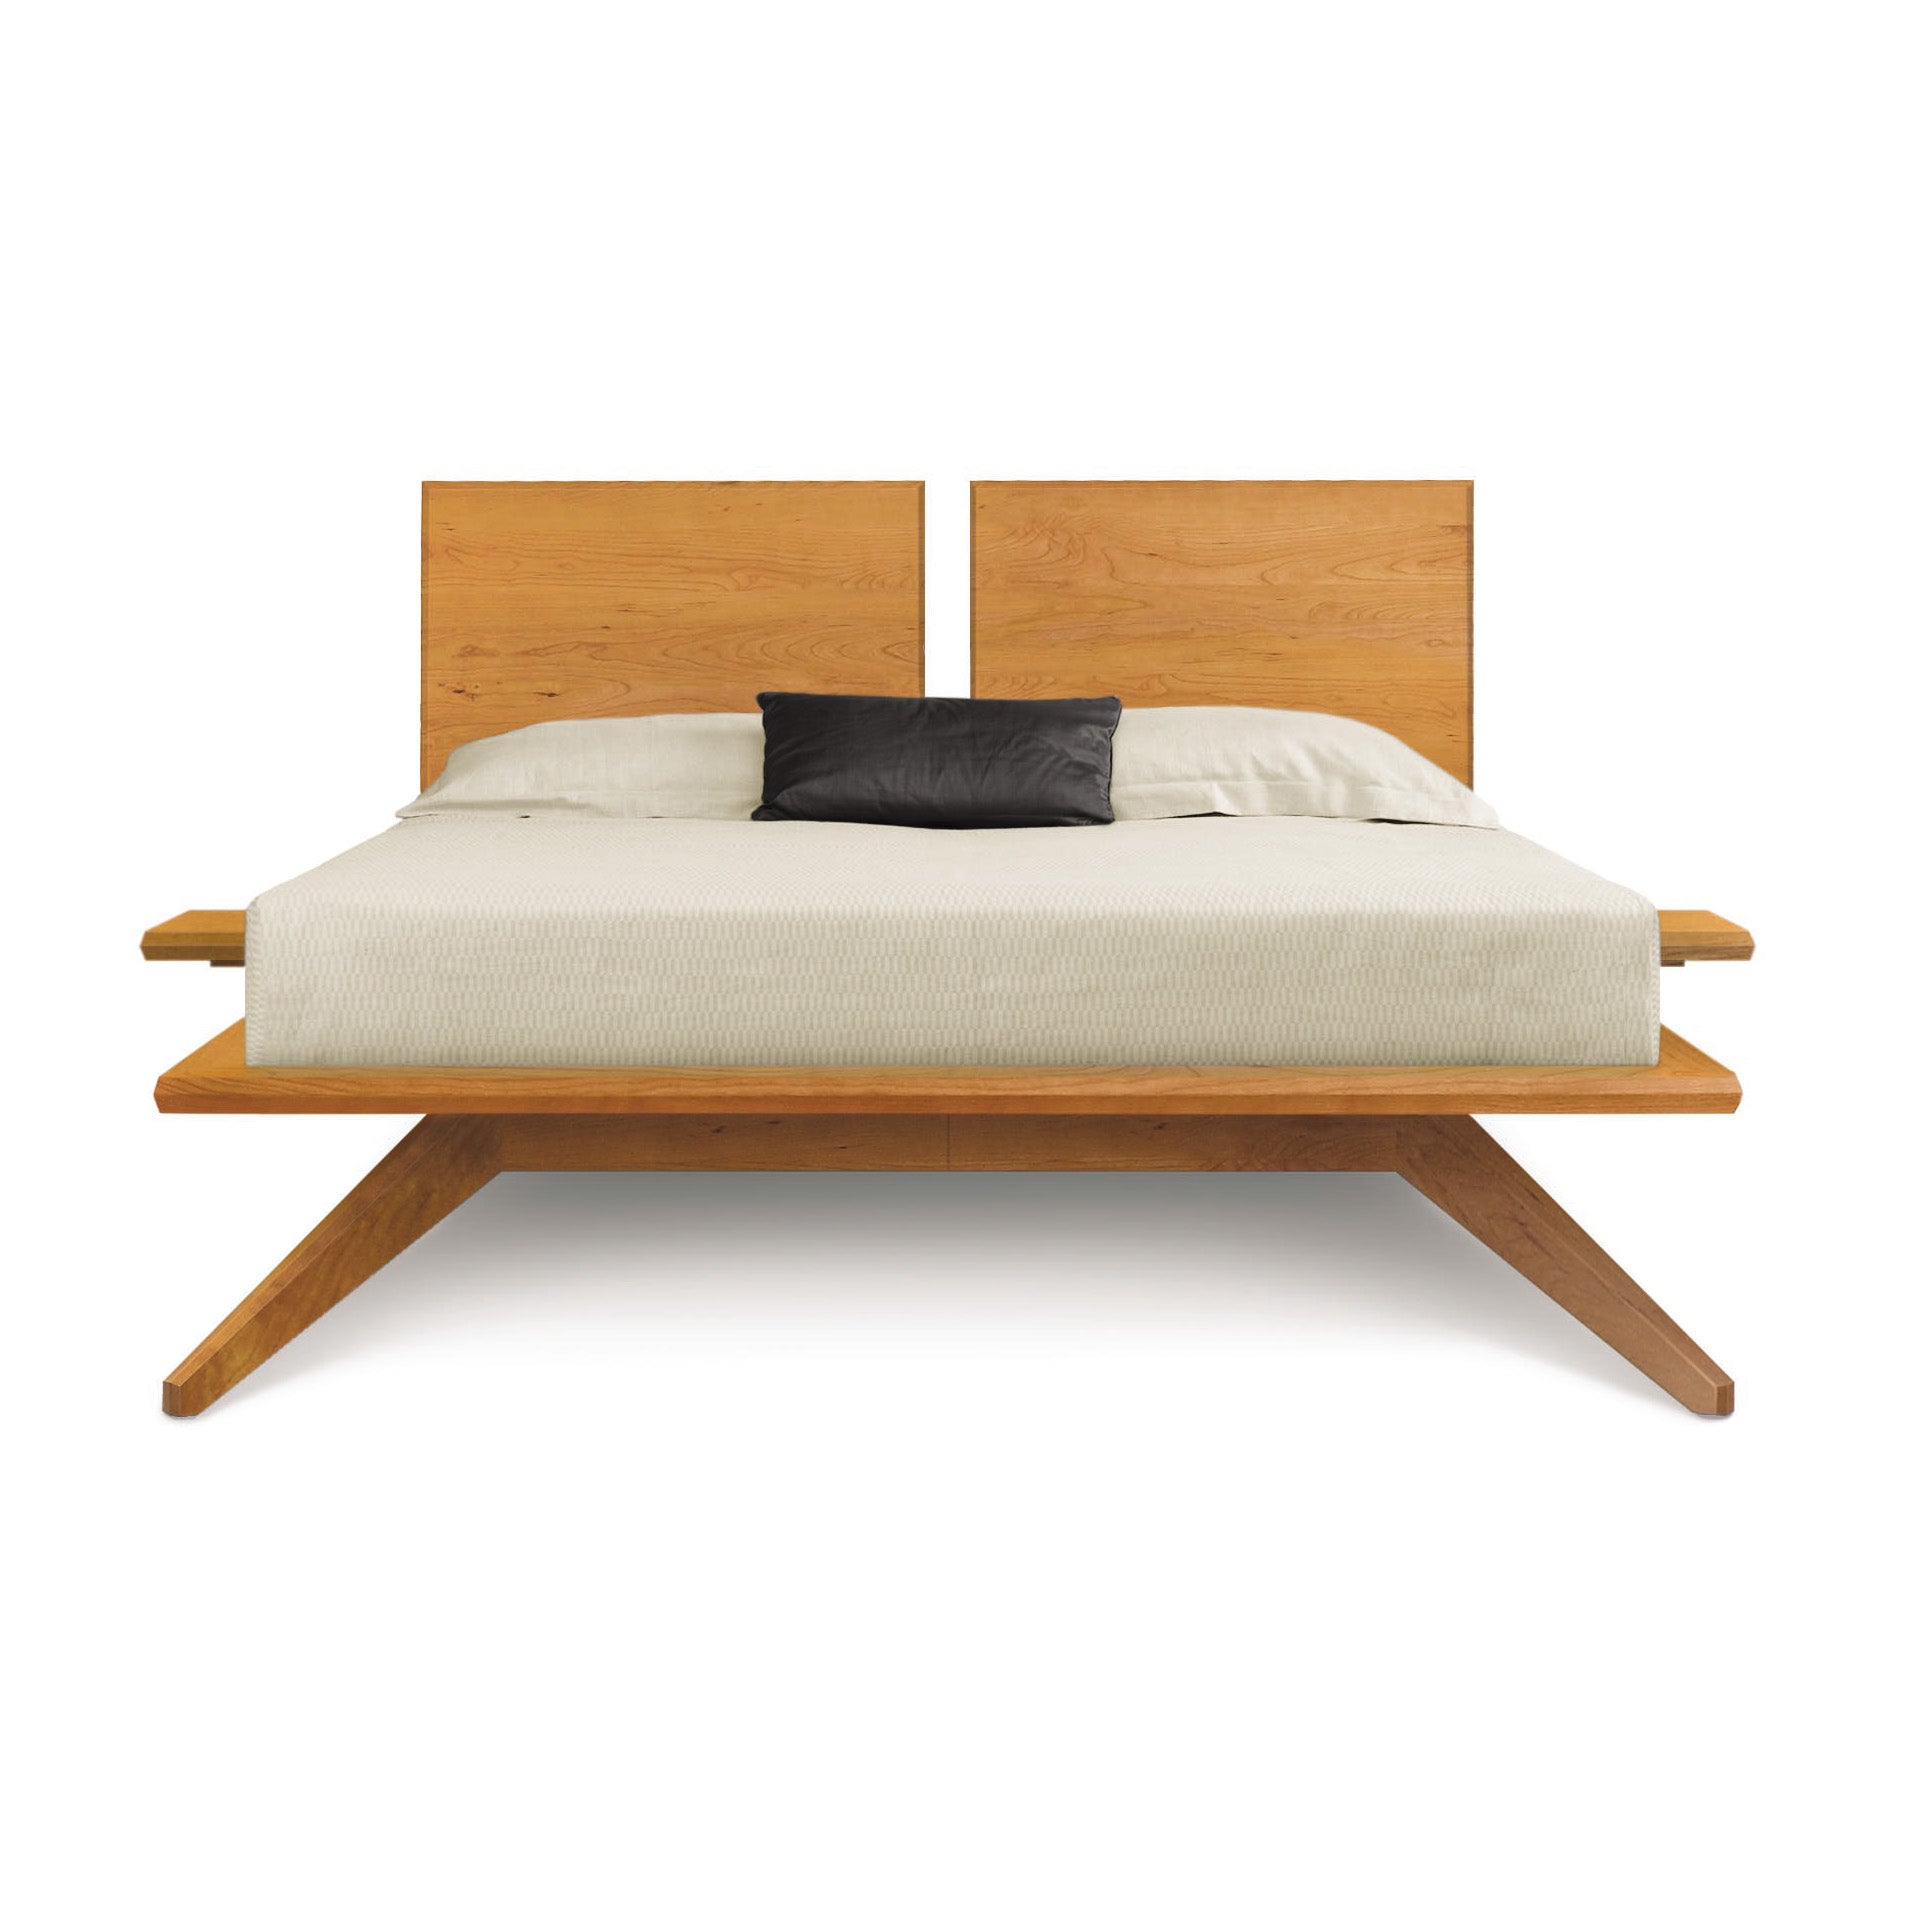 The Astrid Cherry Platform Bed by Copeland Furniture boasts a mid-century modern American design, featuring a wooden headboard and footboard. Crafted from eco-friendly, sustainably harvested solid cherry wood.